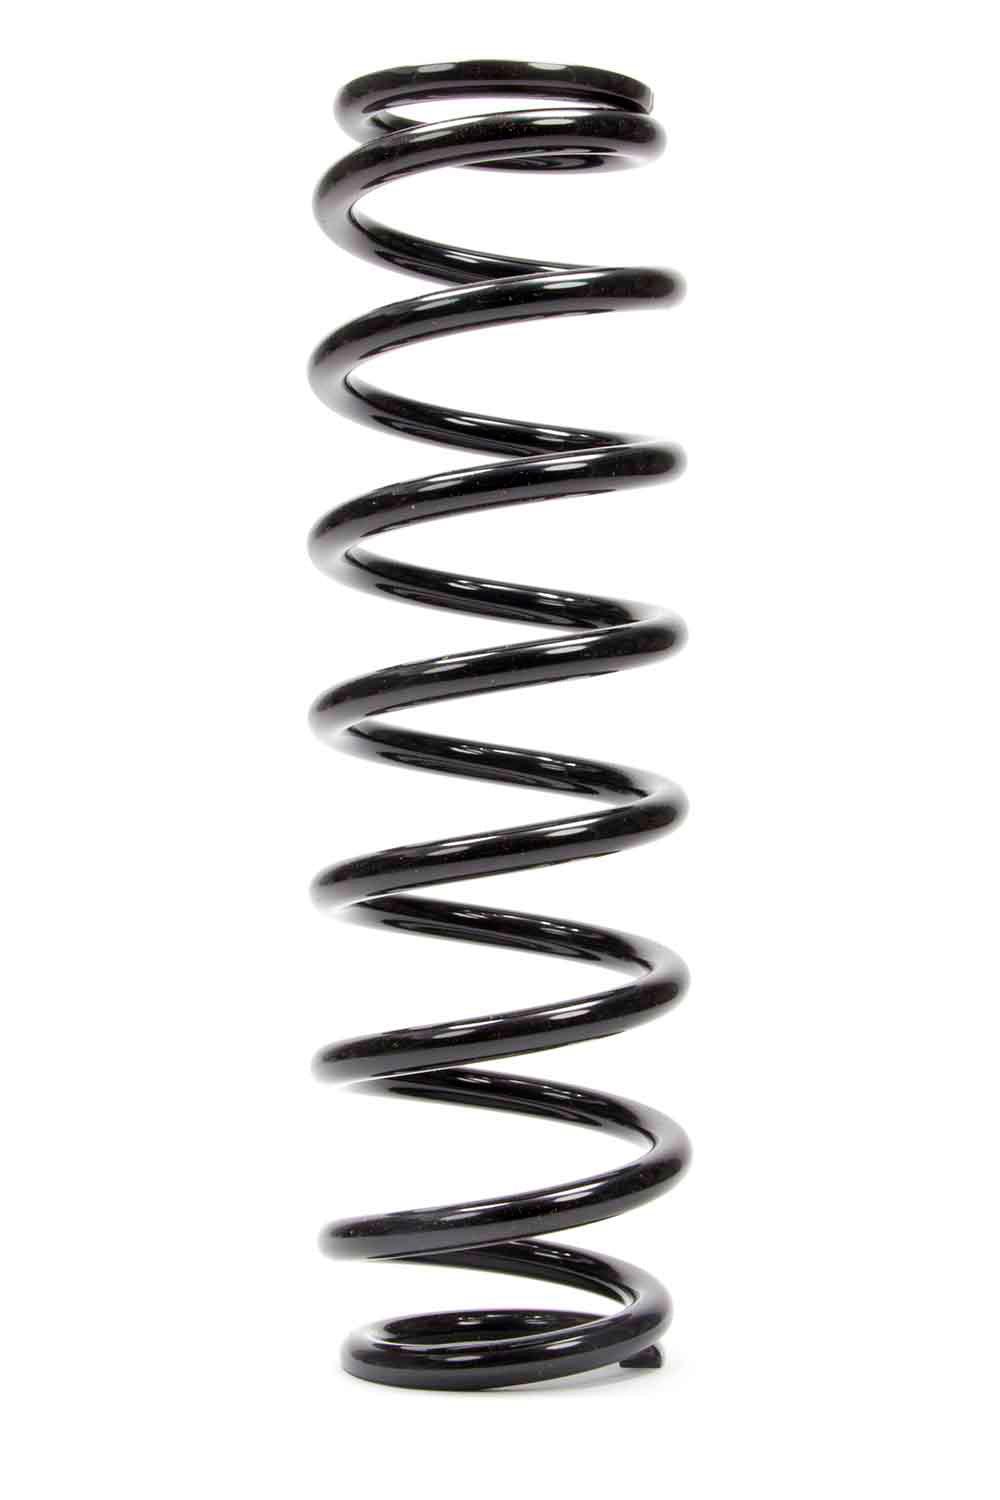 Coil-Over Spring 14in. x 2.625in. x 250lb - Burlile Performance Products